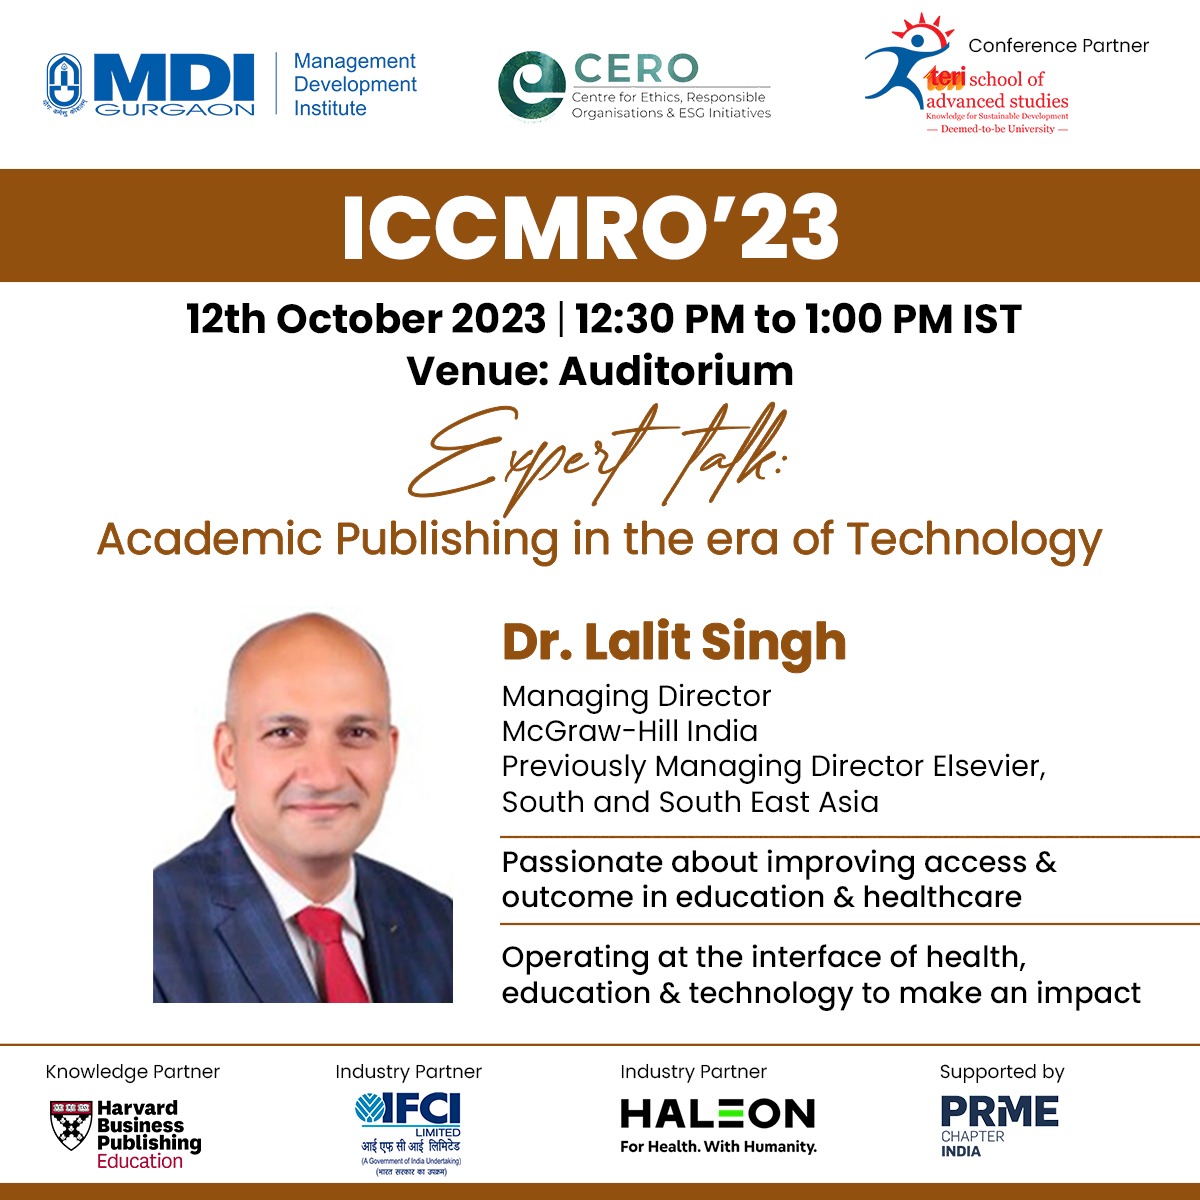 CERO at MDI Gurgaon is excited to invite Dr. Lalit Singh, Managing Director - McGraw Hill India, for an insightful Expert Talk on ‘Academic Publishing in the era of Technology’, as a part (ICCMRO’23) Date 📅 - 12th October Time 🕙 - 12:30 to 1:00 PM IST Venue 📍 - MDI Auditorium